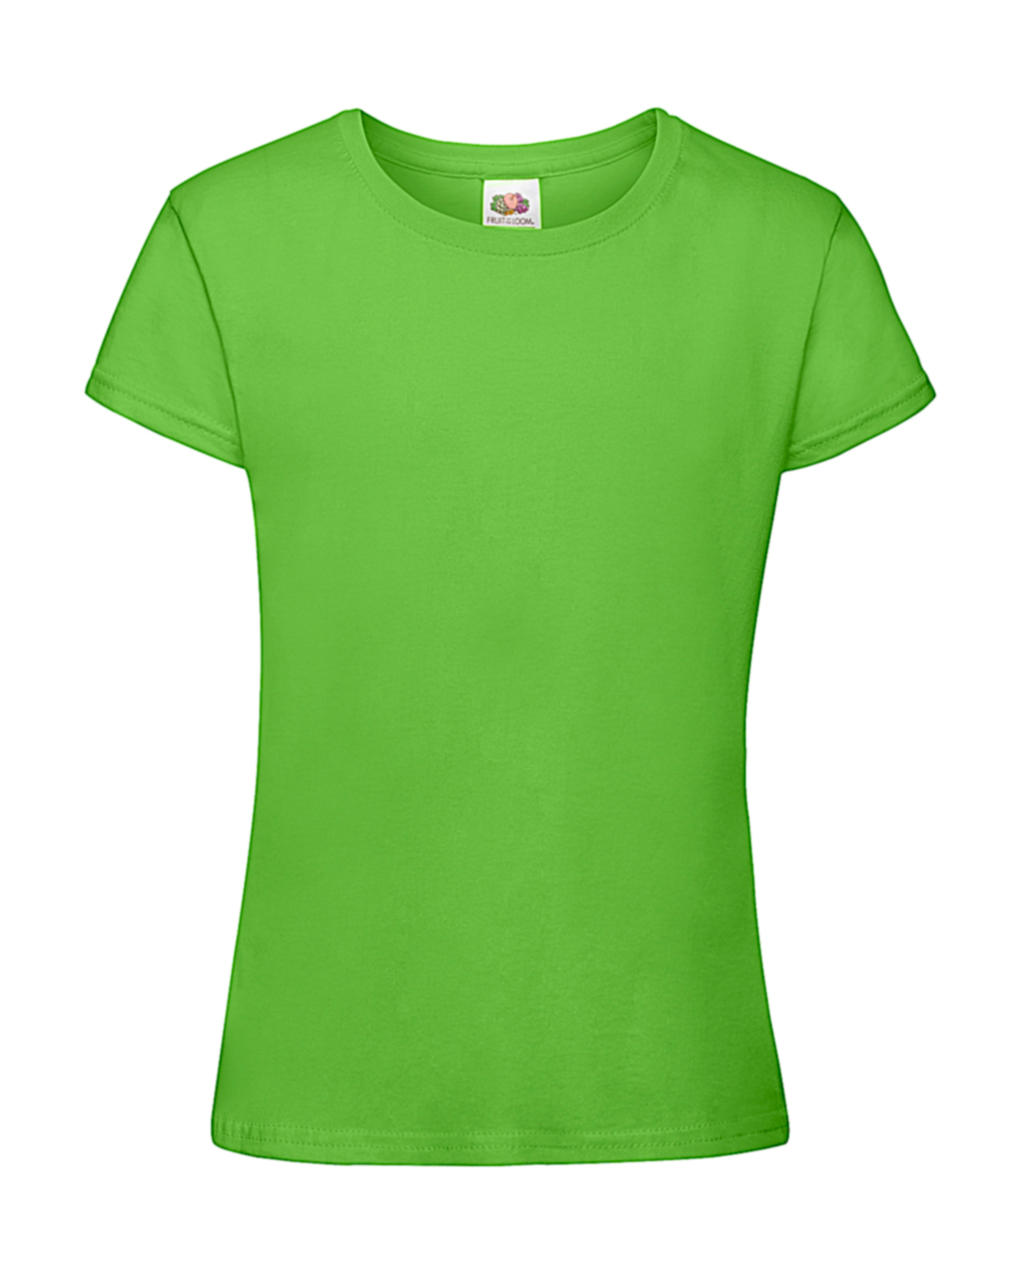  Girls Sofspun? T in Farbe Lime Green